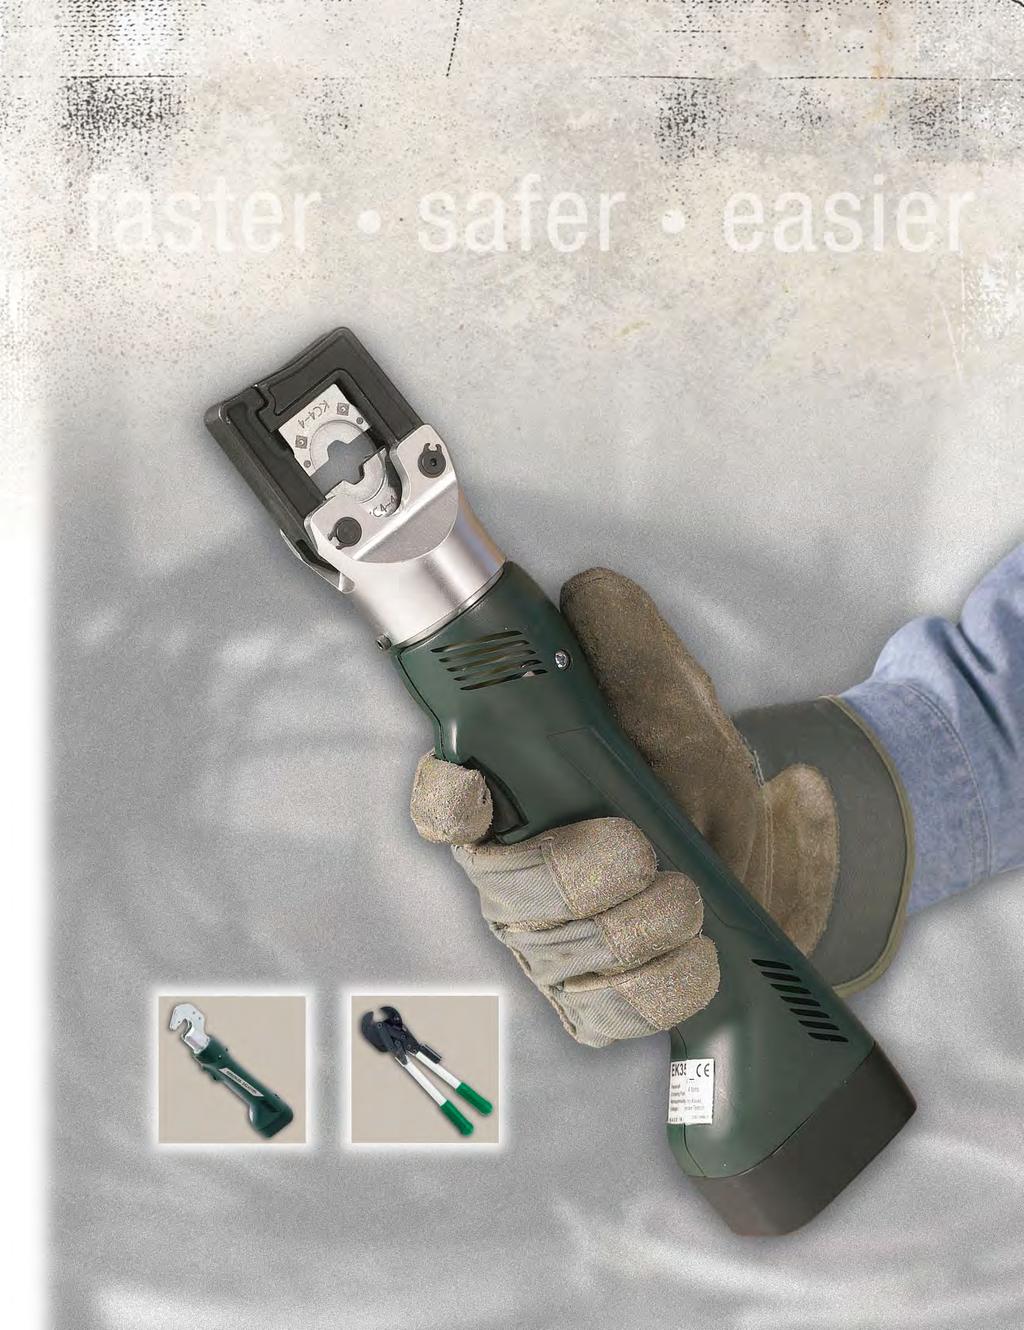 From battery to ratchet, if it needs to be cut or crimped, Greenlee s got the tool.